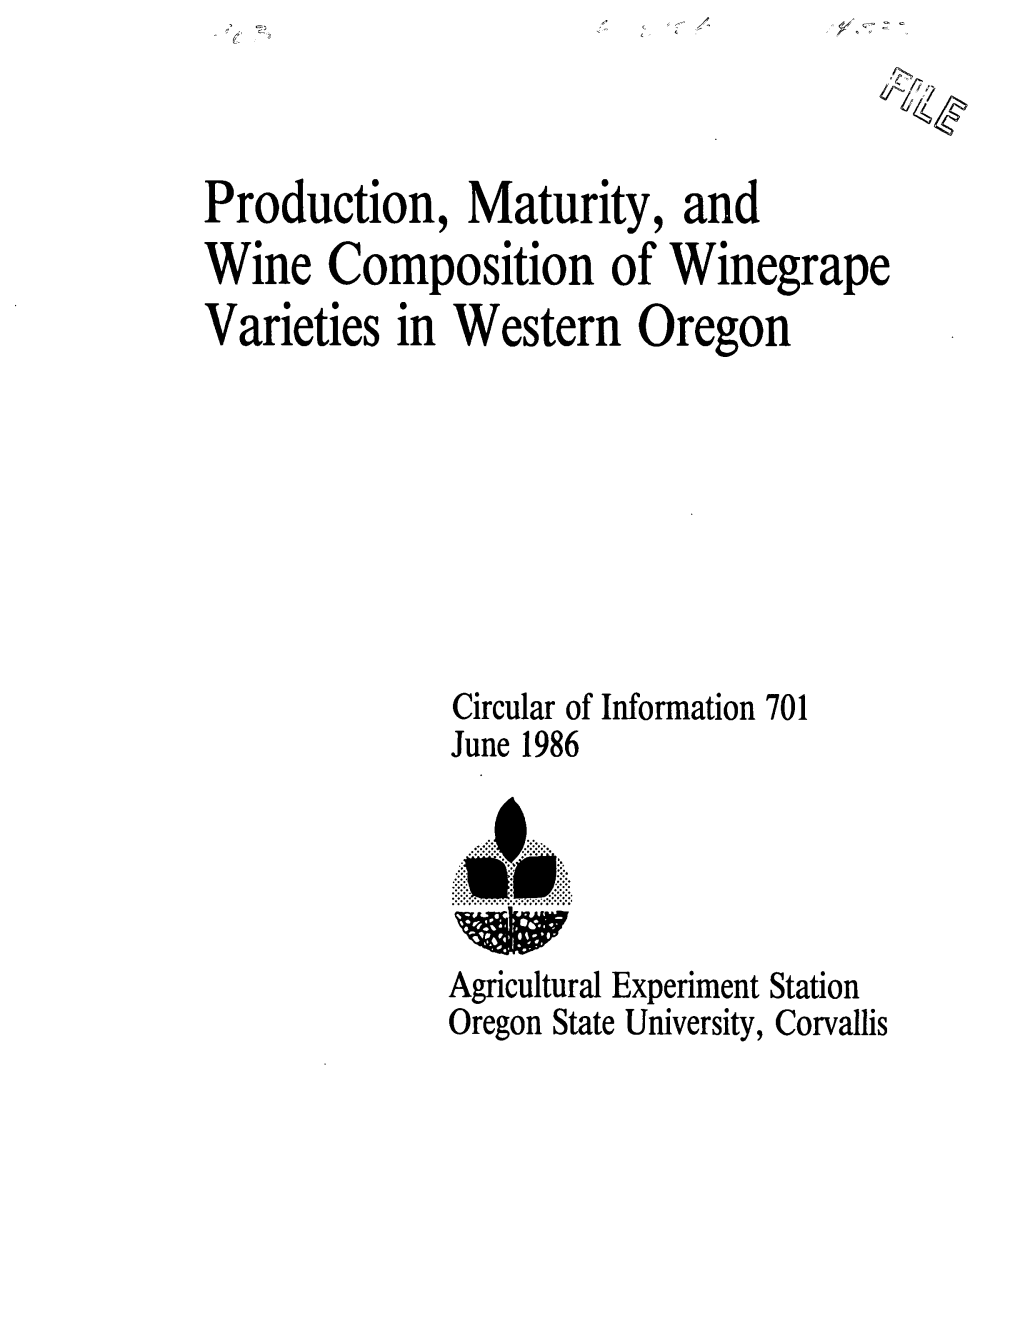 Production, Maturity, and Wine Composition of Winegrape Varieties in Western Oregon